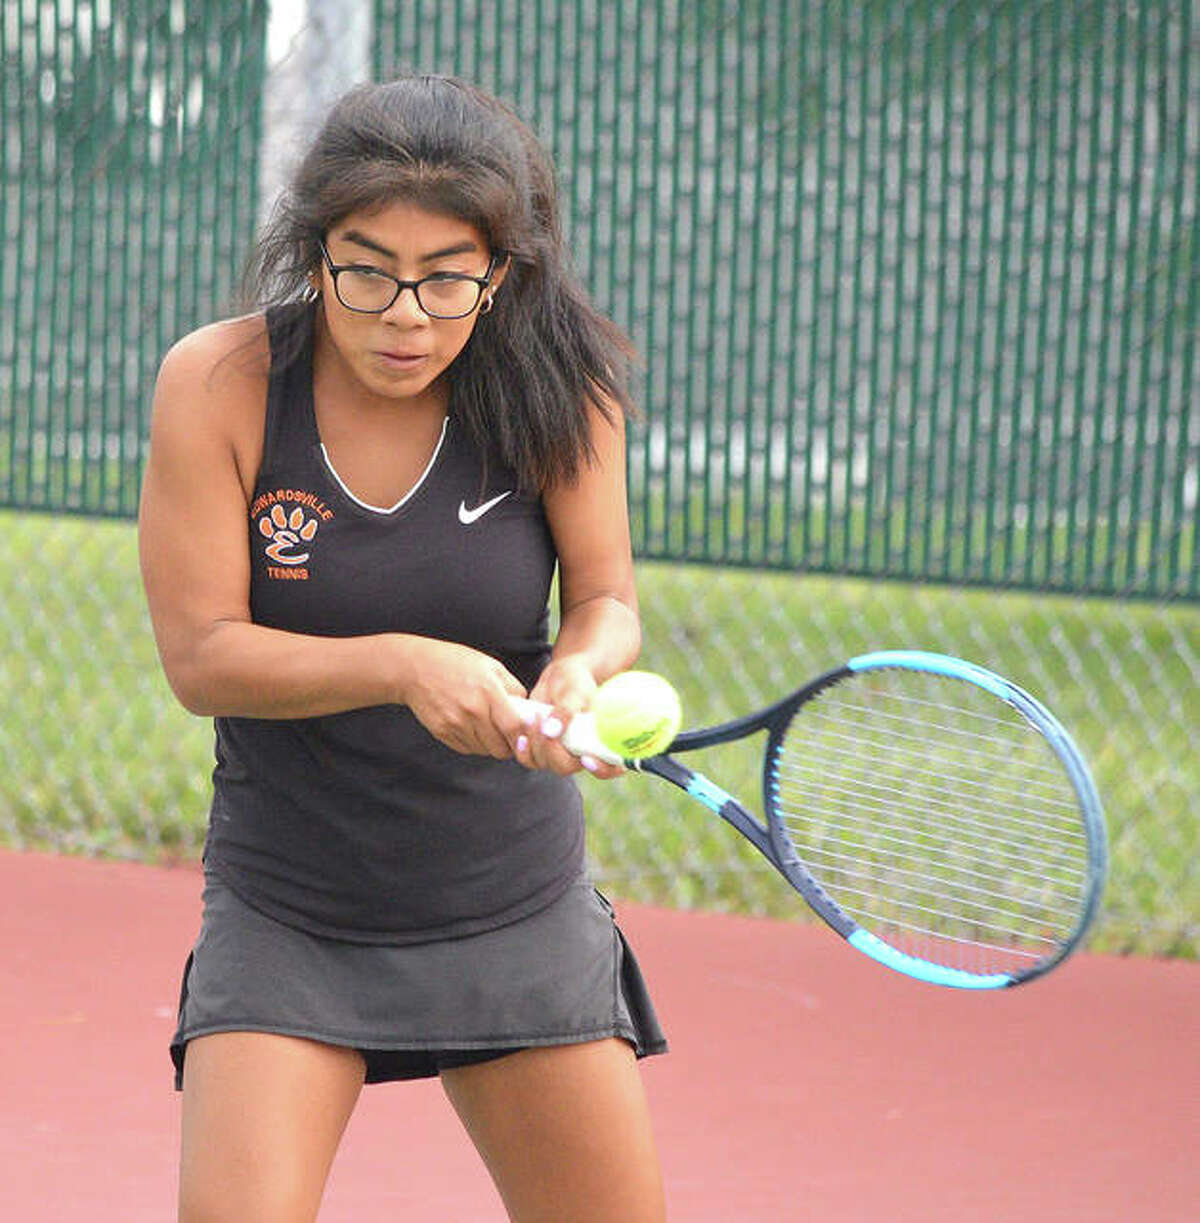 Edwardsville junior Chloe Trimpe makes a backhand return during her No. 1 doubles match on Tuesday in the Southwestern Conference Tournament at the EHS Tennis Center.